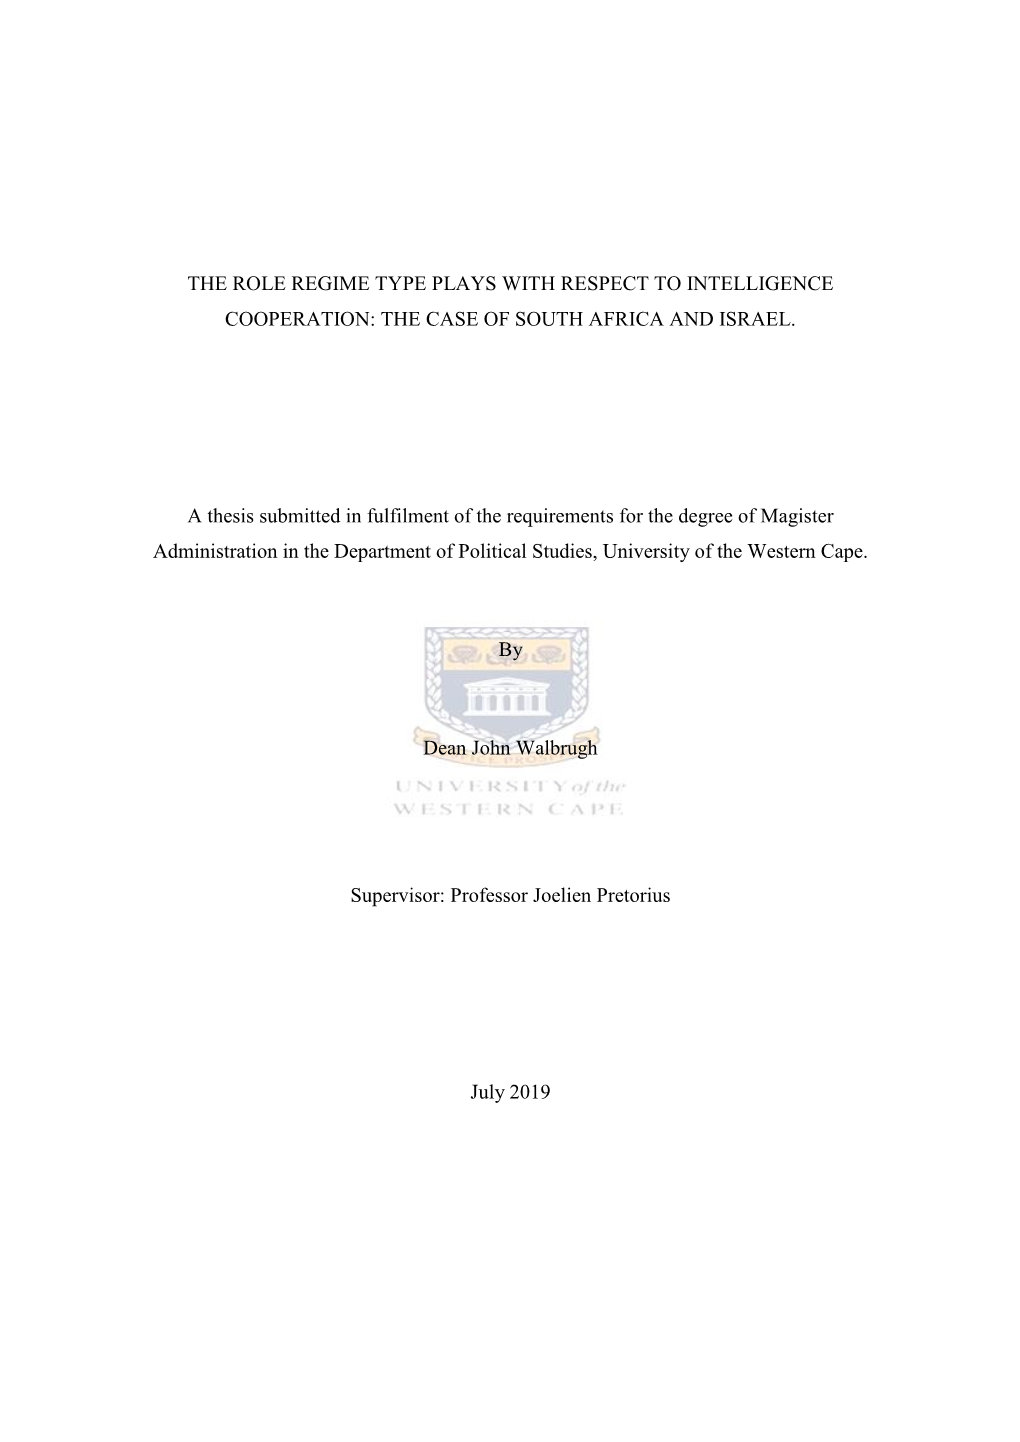 THE CASE of SOUTH AFRICA and ISRAEL. a Thesis Submitted In